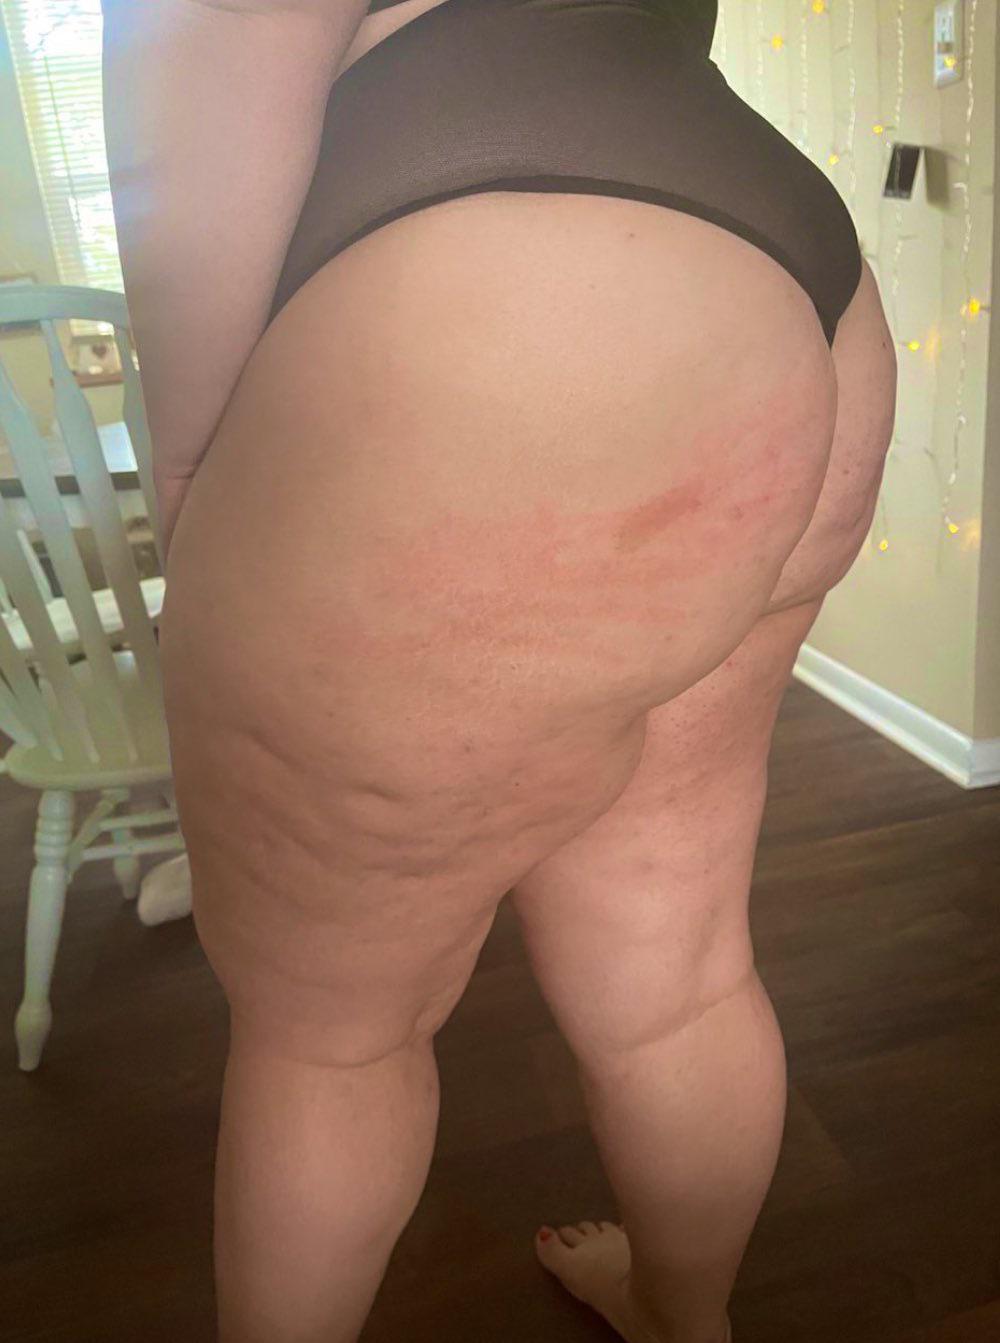 Love to be spanked